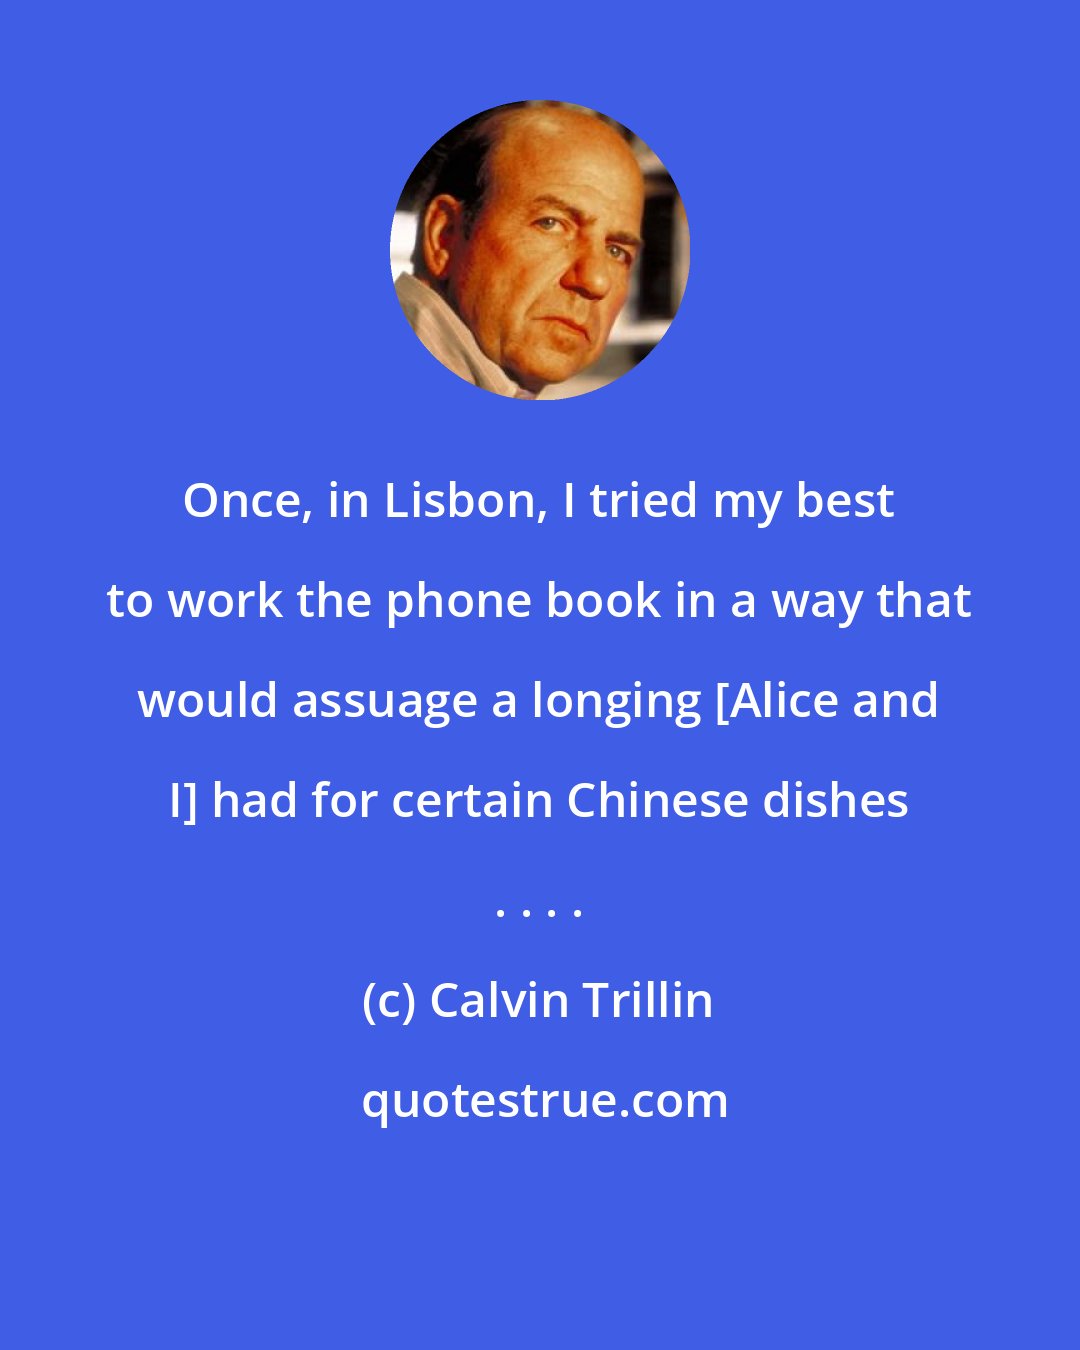 Calvin Trillin: Once, in Lisbon, I tried my best to work the phone book in a way that would assuage a longing [Alice and I] had for certain Chinese dishes . . . .